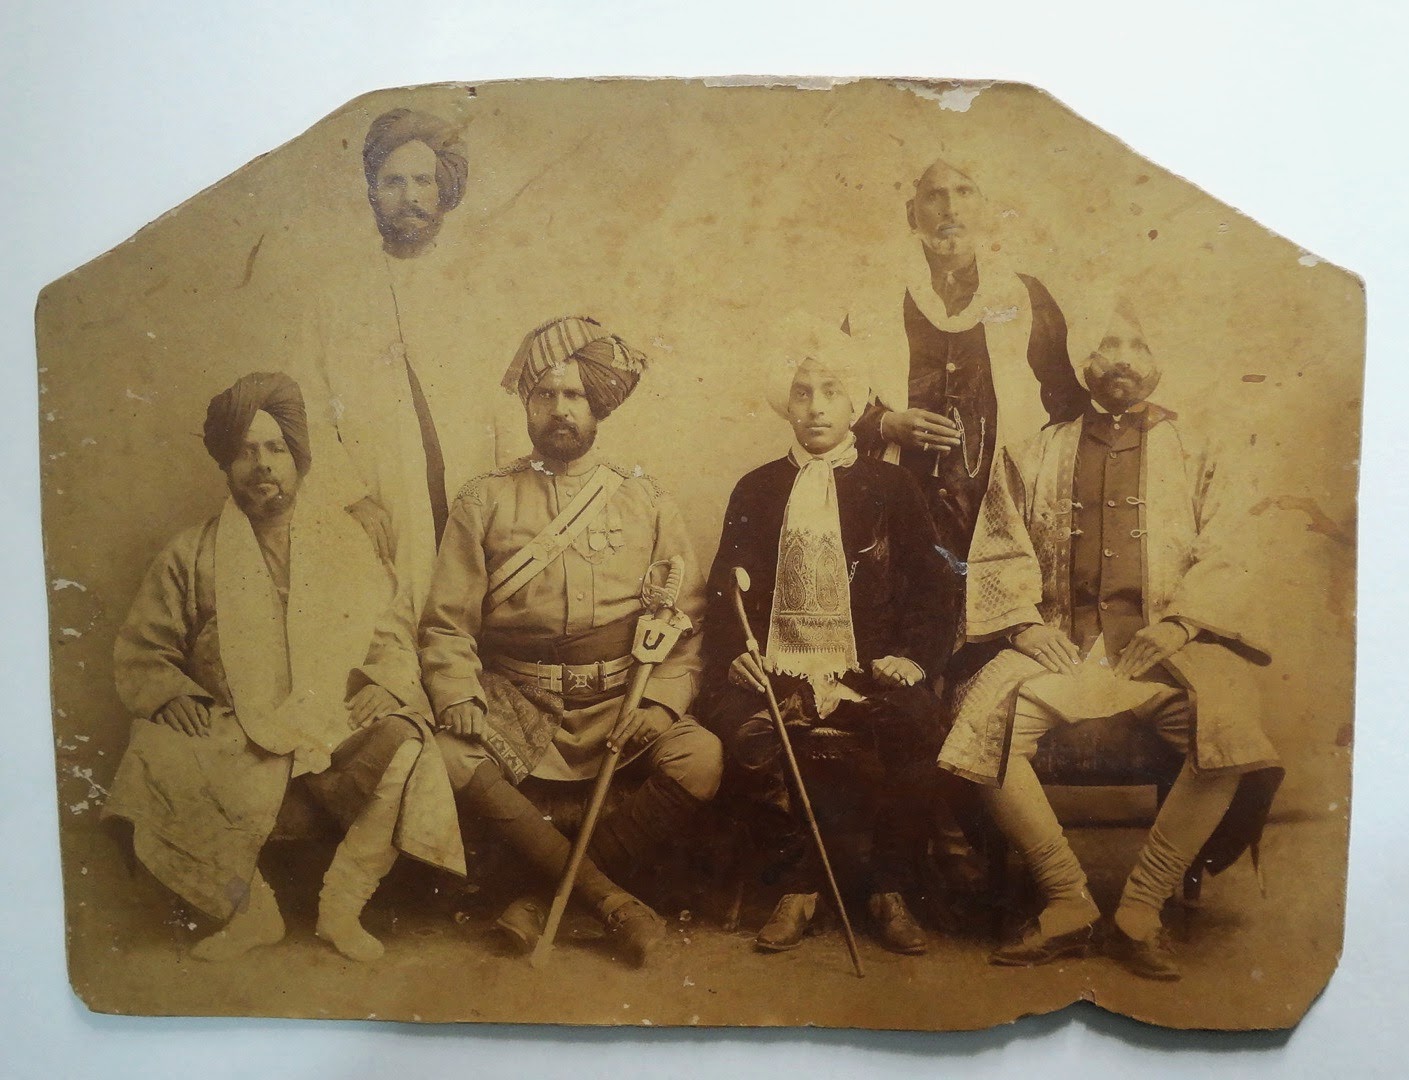 Sikh Prince and Group - Date Unknown